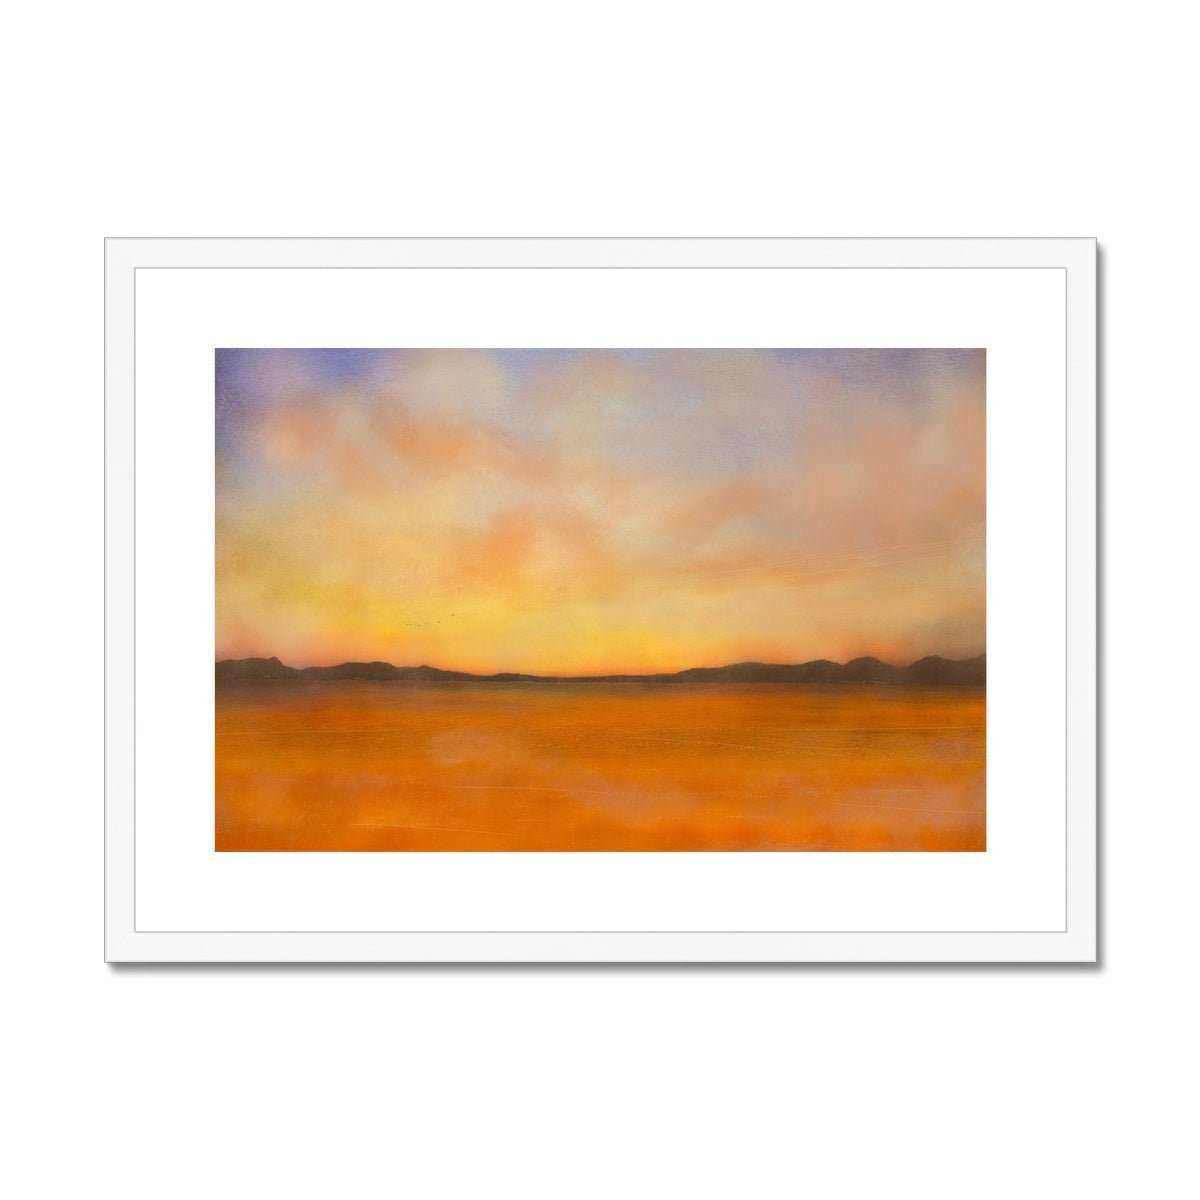 Islay Dawn Painting | Framed & Mounted Prints From Scotland-Framed & Mounted Prints-Hebridean Islands Art Gallery-A2 Landscape-White Frame-Paintings, Prints, Homeware, Art Gifts From Scotland By Scottish Artist Kevin Hunter